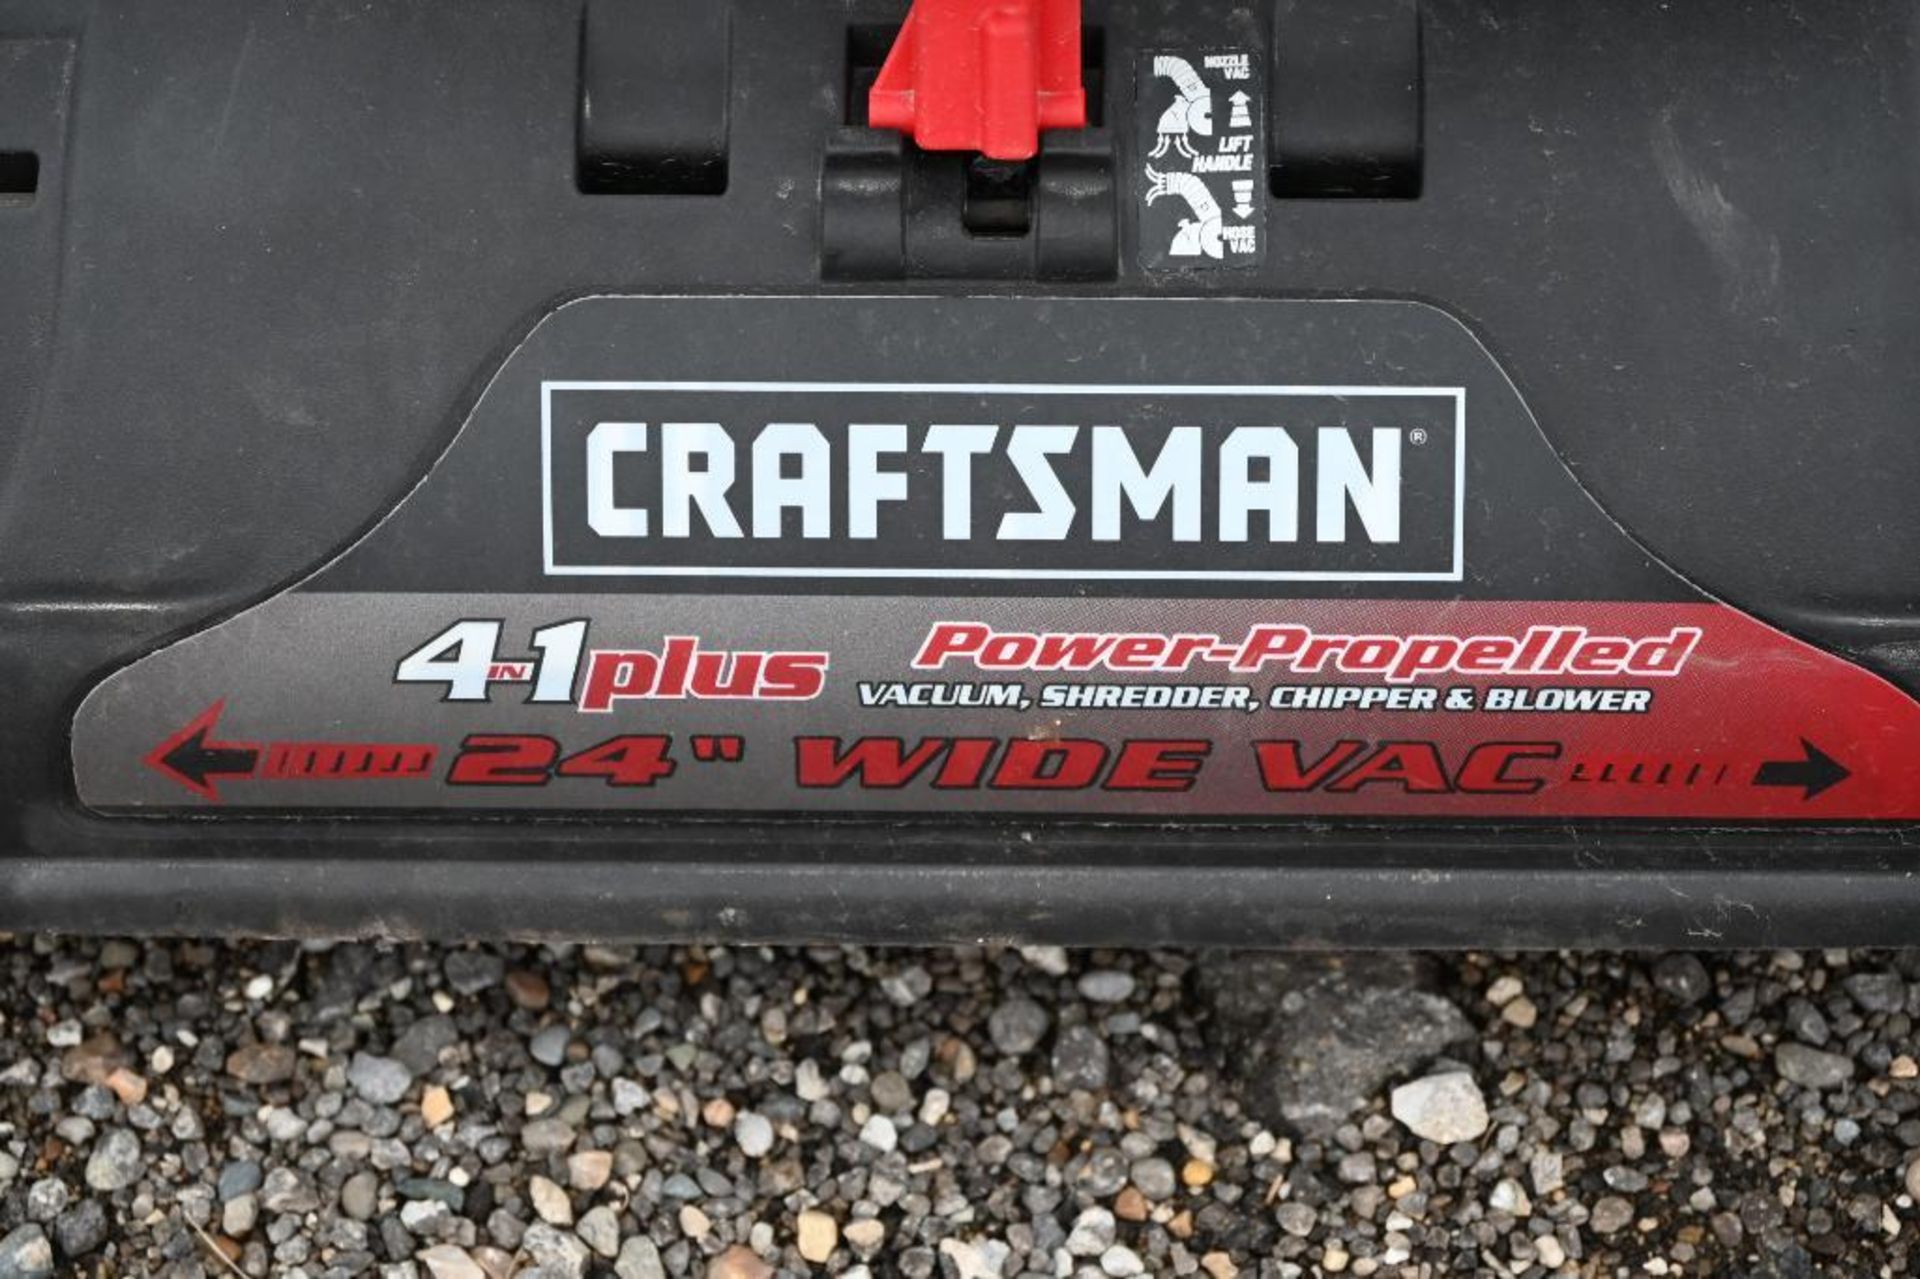 Craftsman 4-in-1 Vacuum, Shredder, Chipper, and Blower - Image 3 of 9